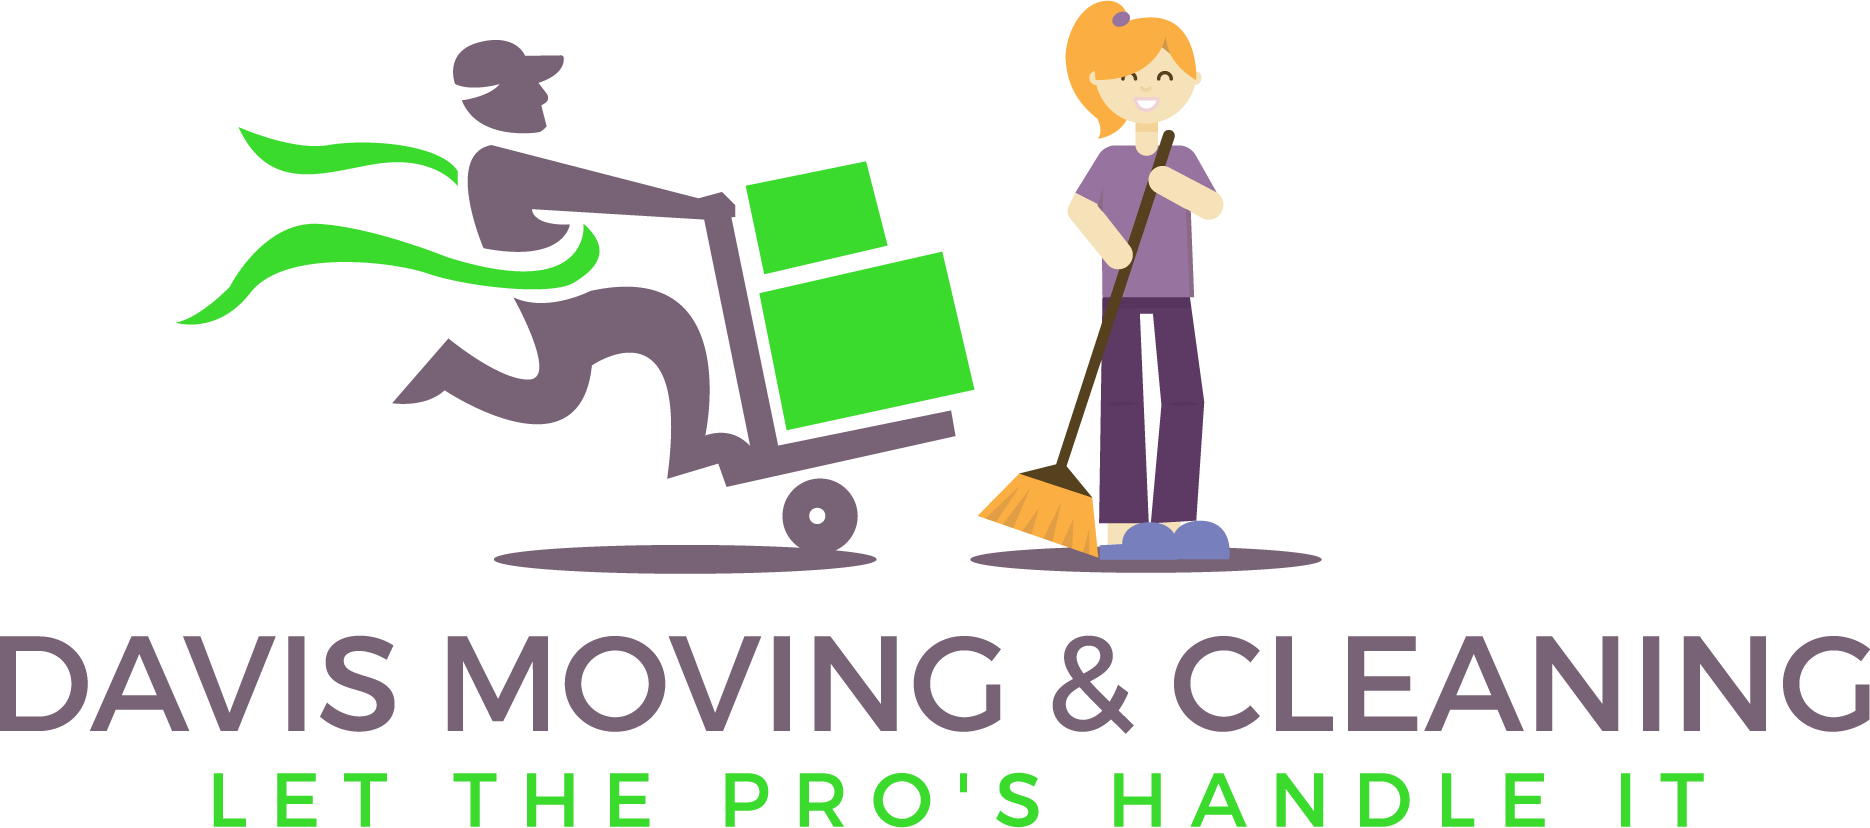 Davis Moving & Cleaning: Your Trusted Partner for Local and Intrastate Moving Services